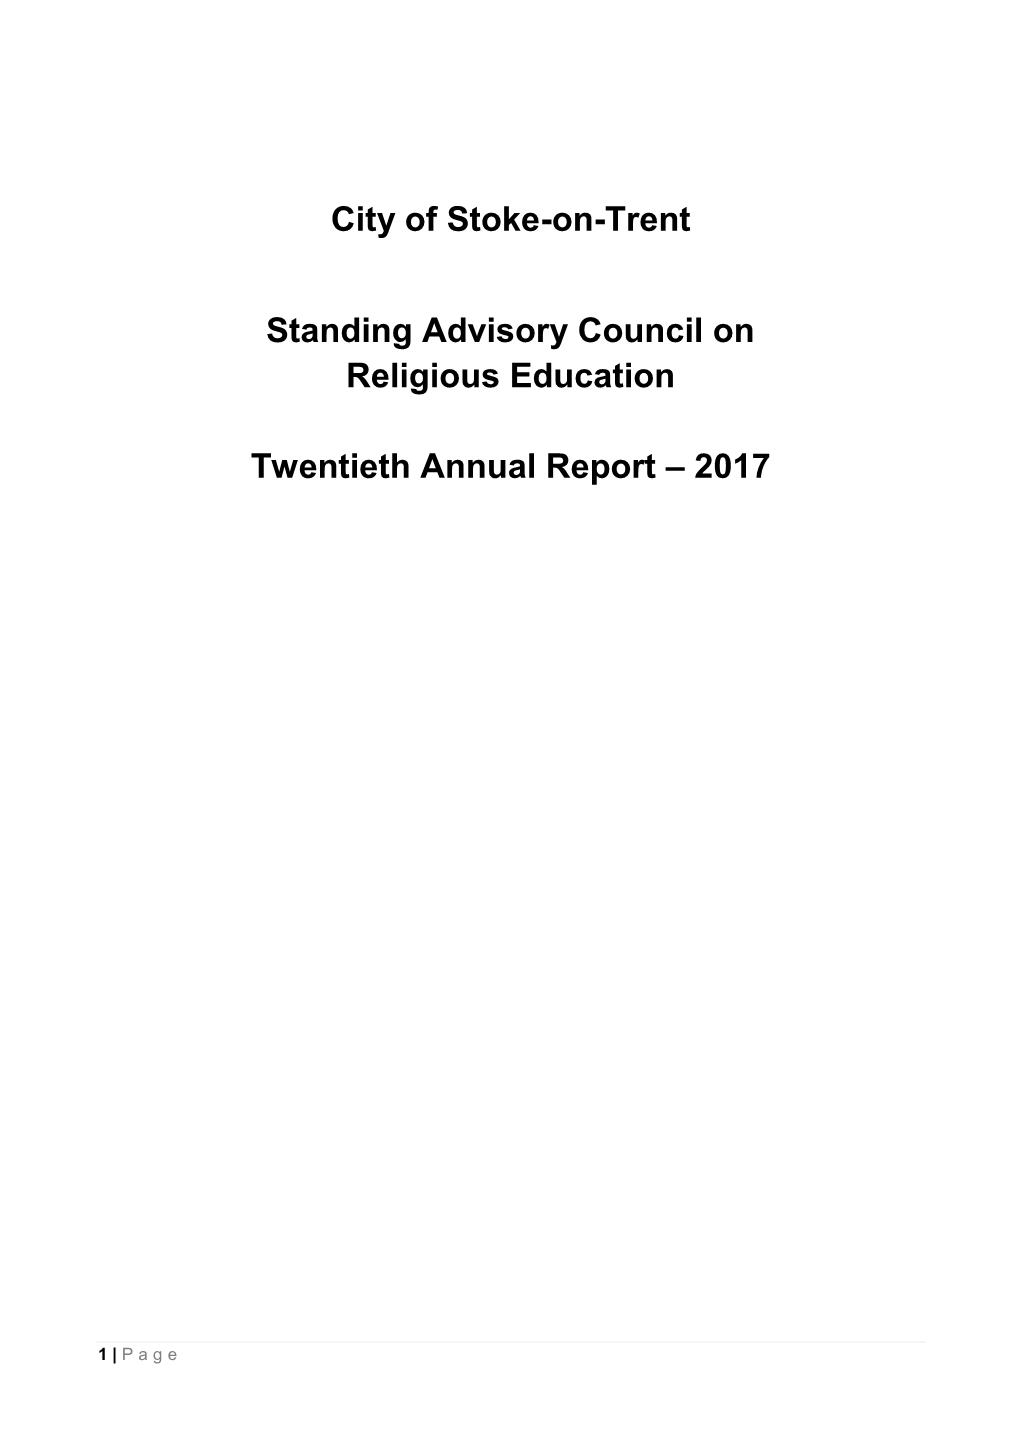 City of Stoke-On-Trent Standing Advisory Council on Religious